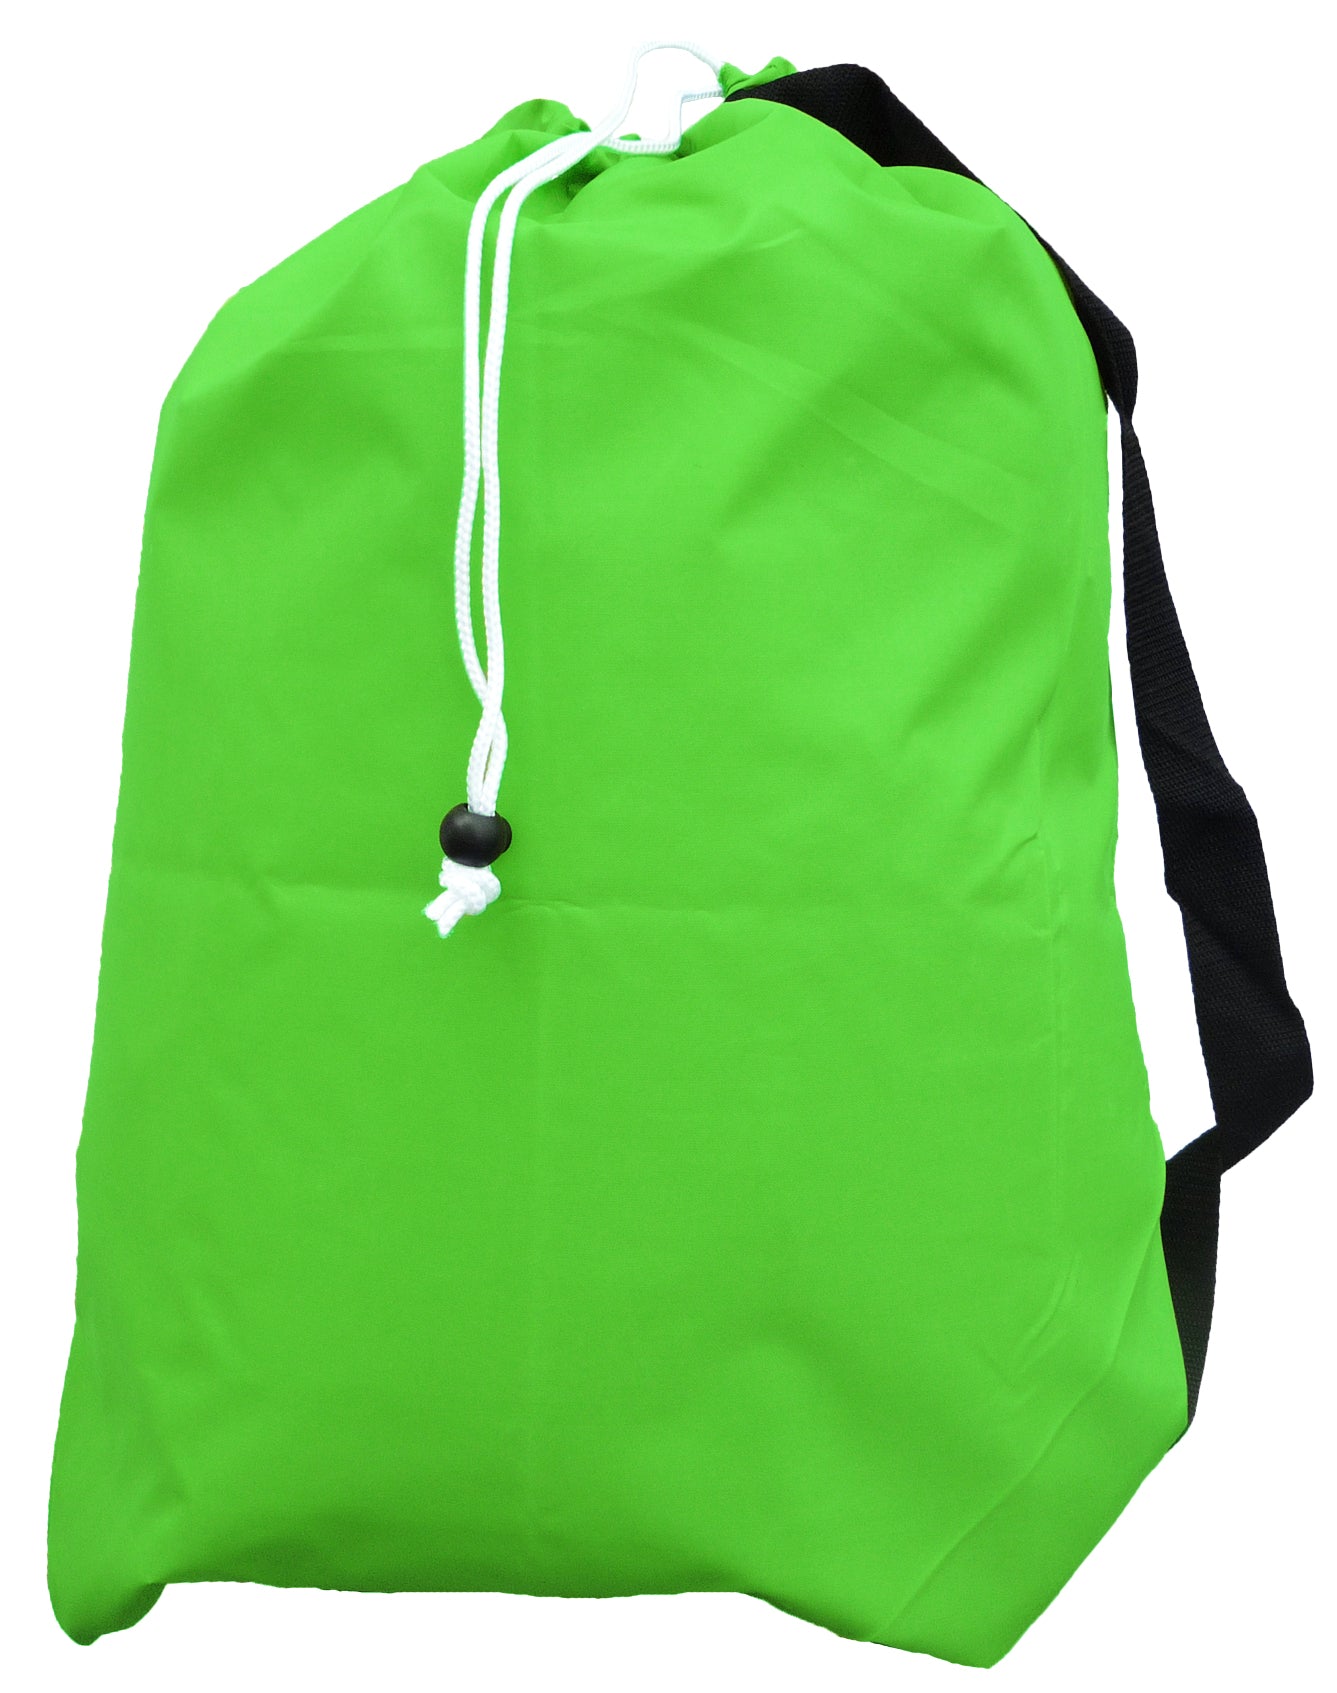 Large Laundry Bag with Strap, Fluorescent Lime Green